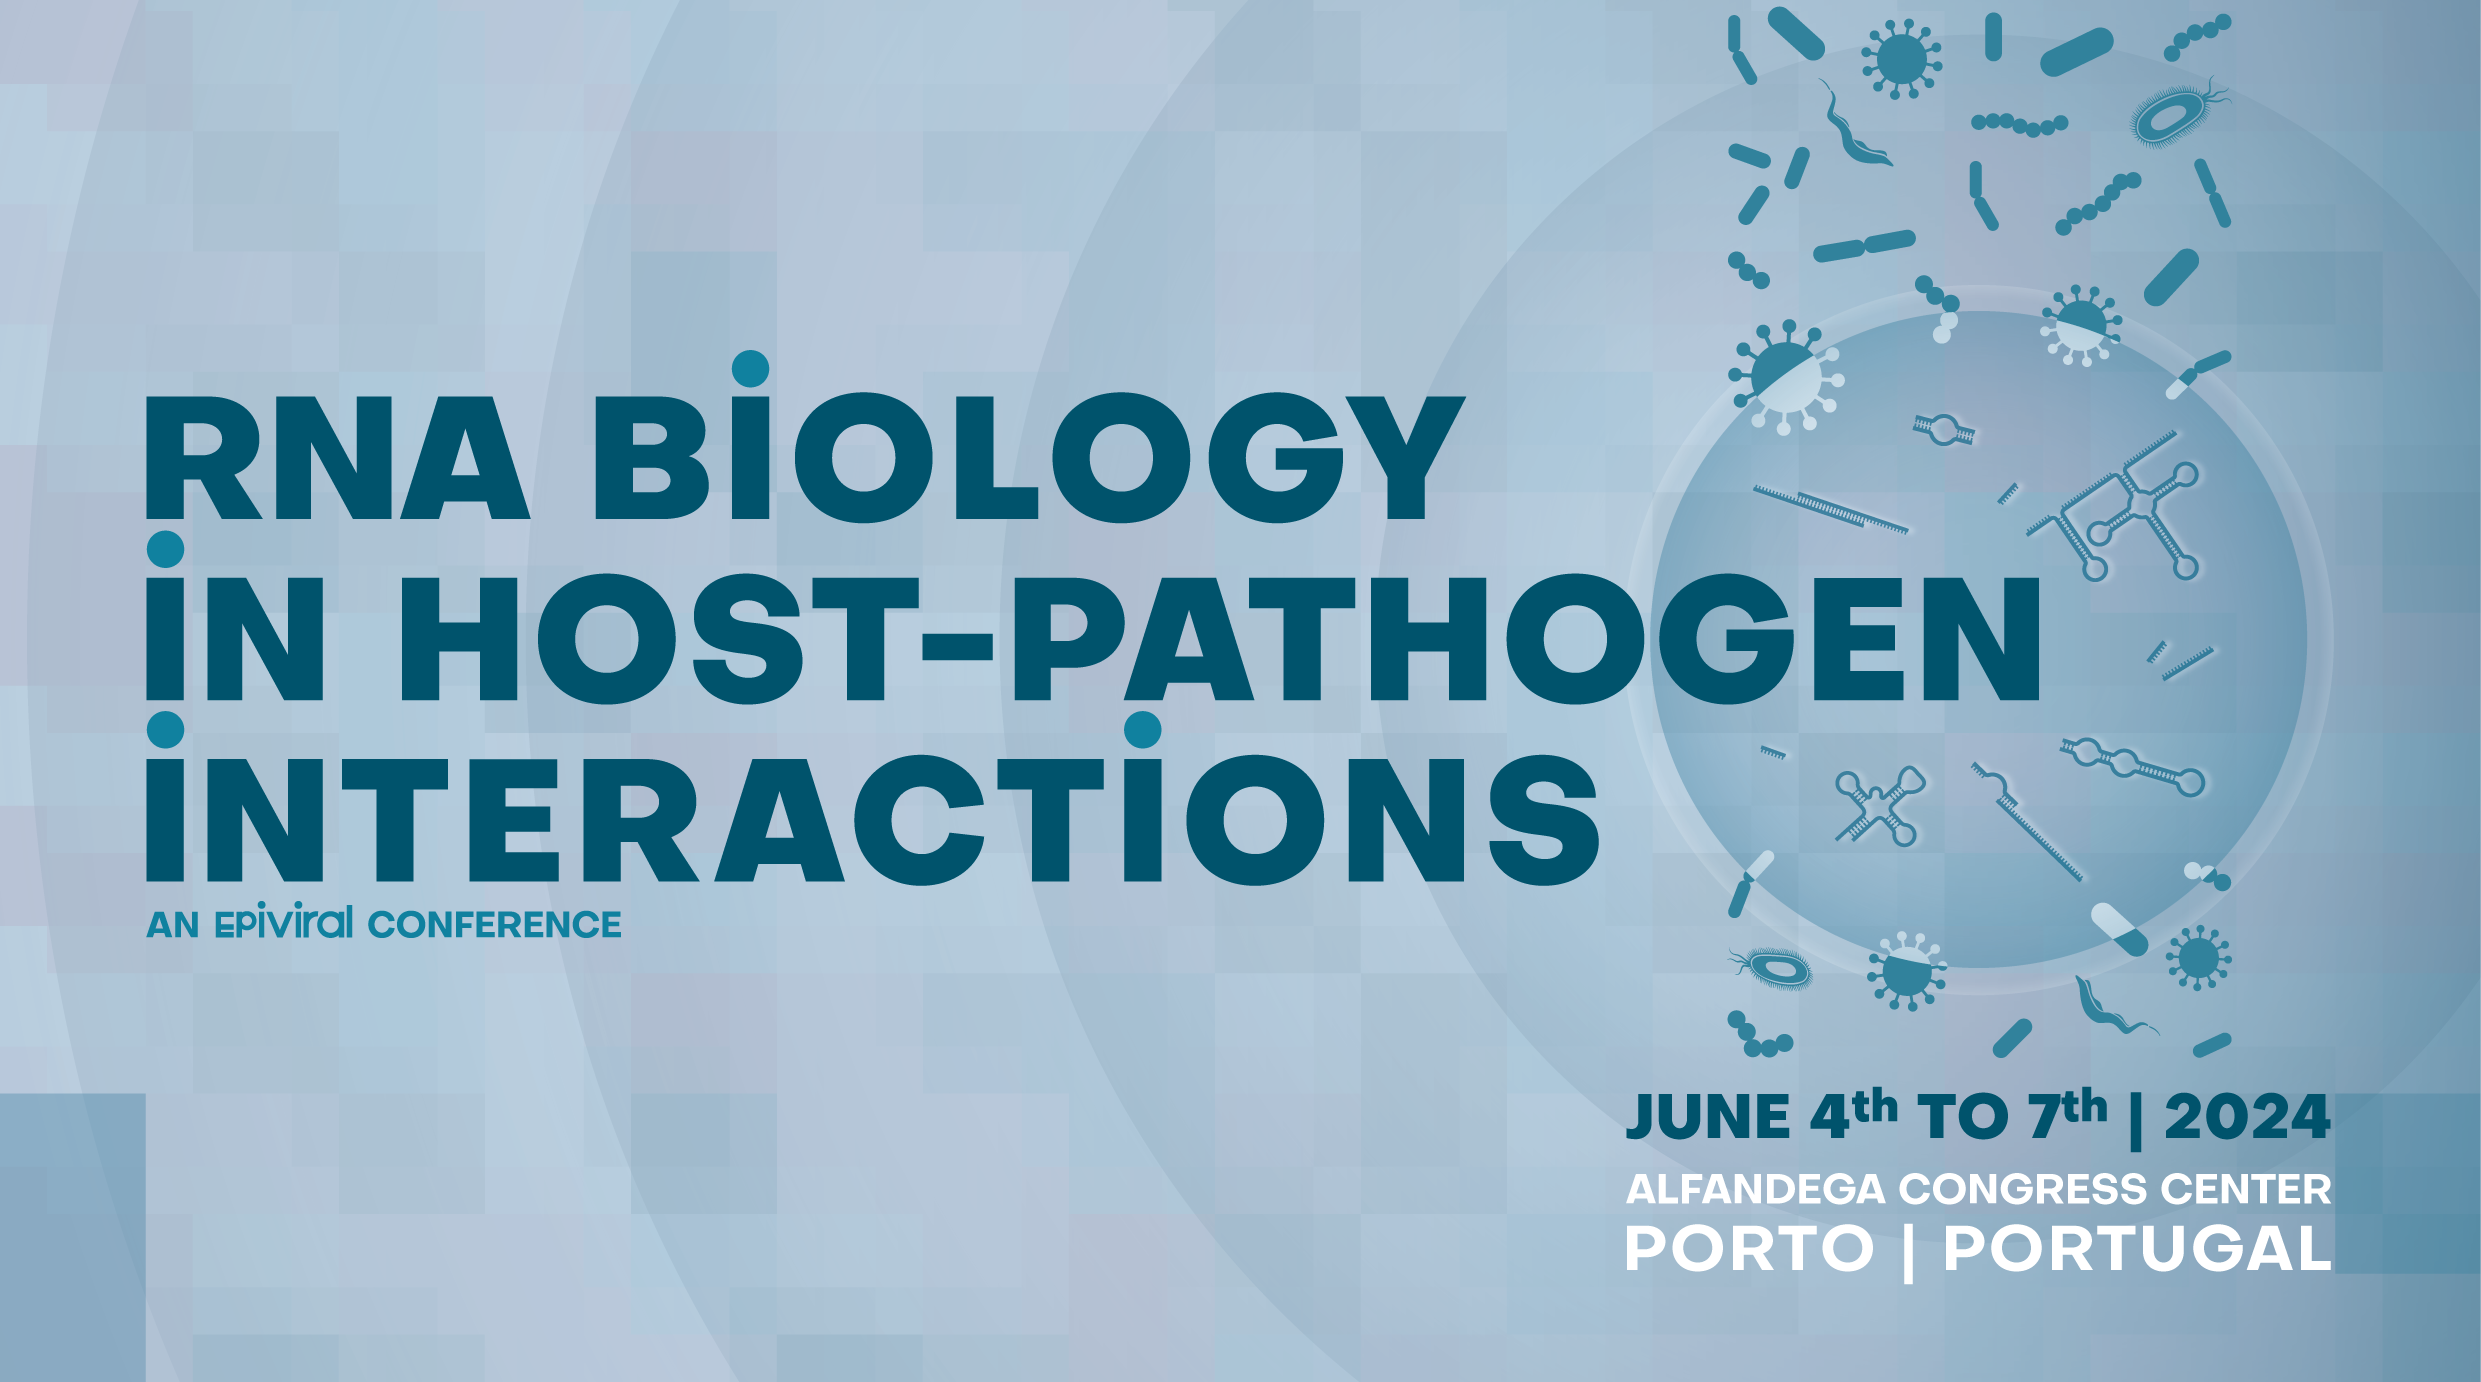 Announcement | EpiViral Conference on RNA biology in host-pathogen interactions